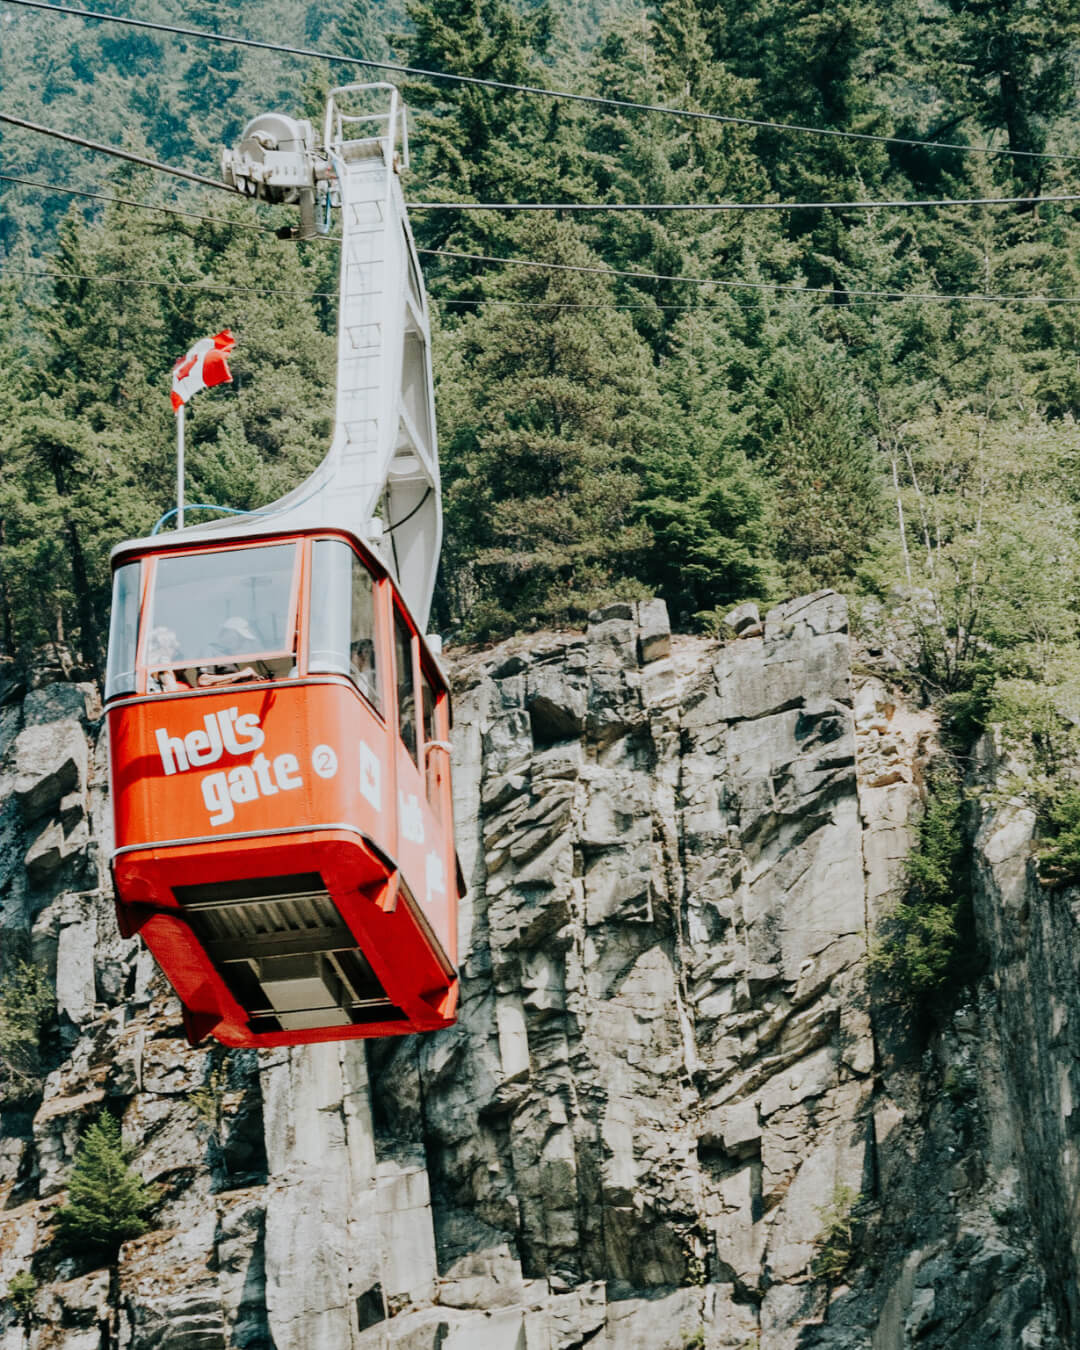 A bright red air tram hangs in the air next to a cliff face